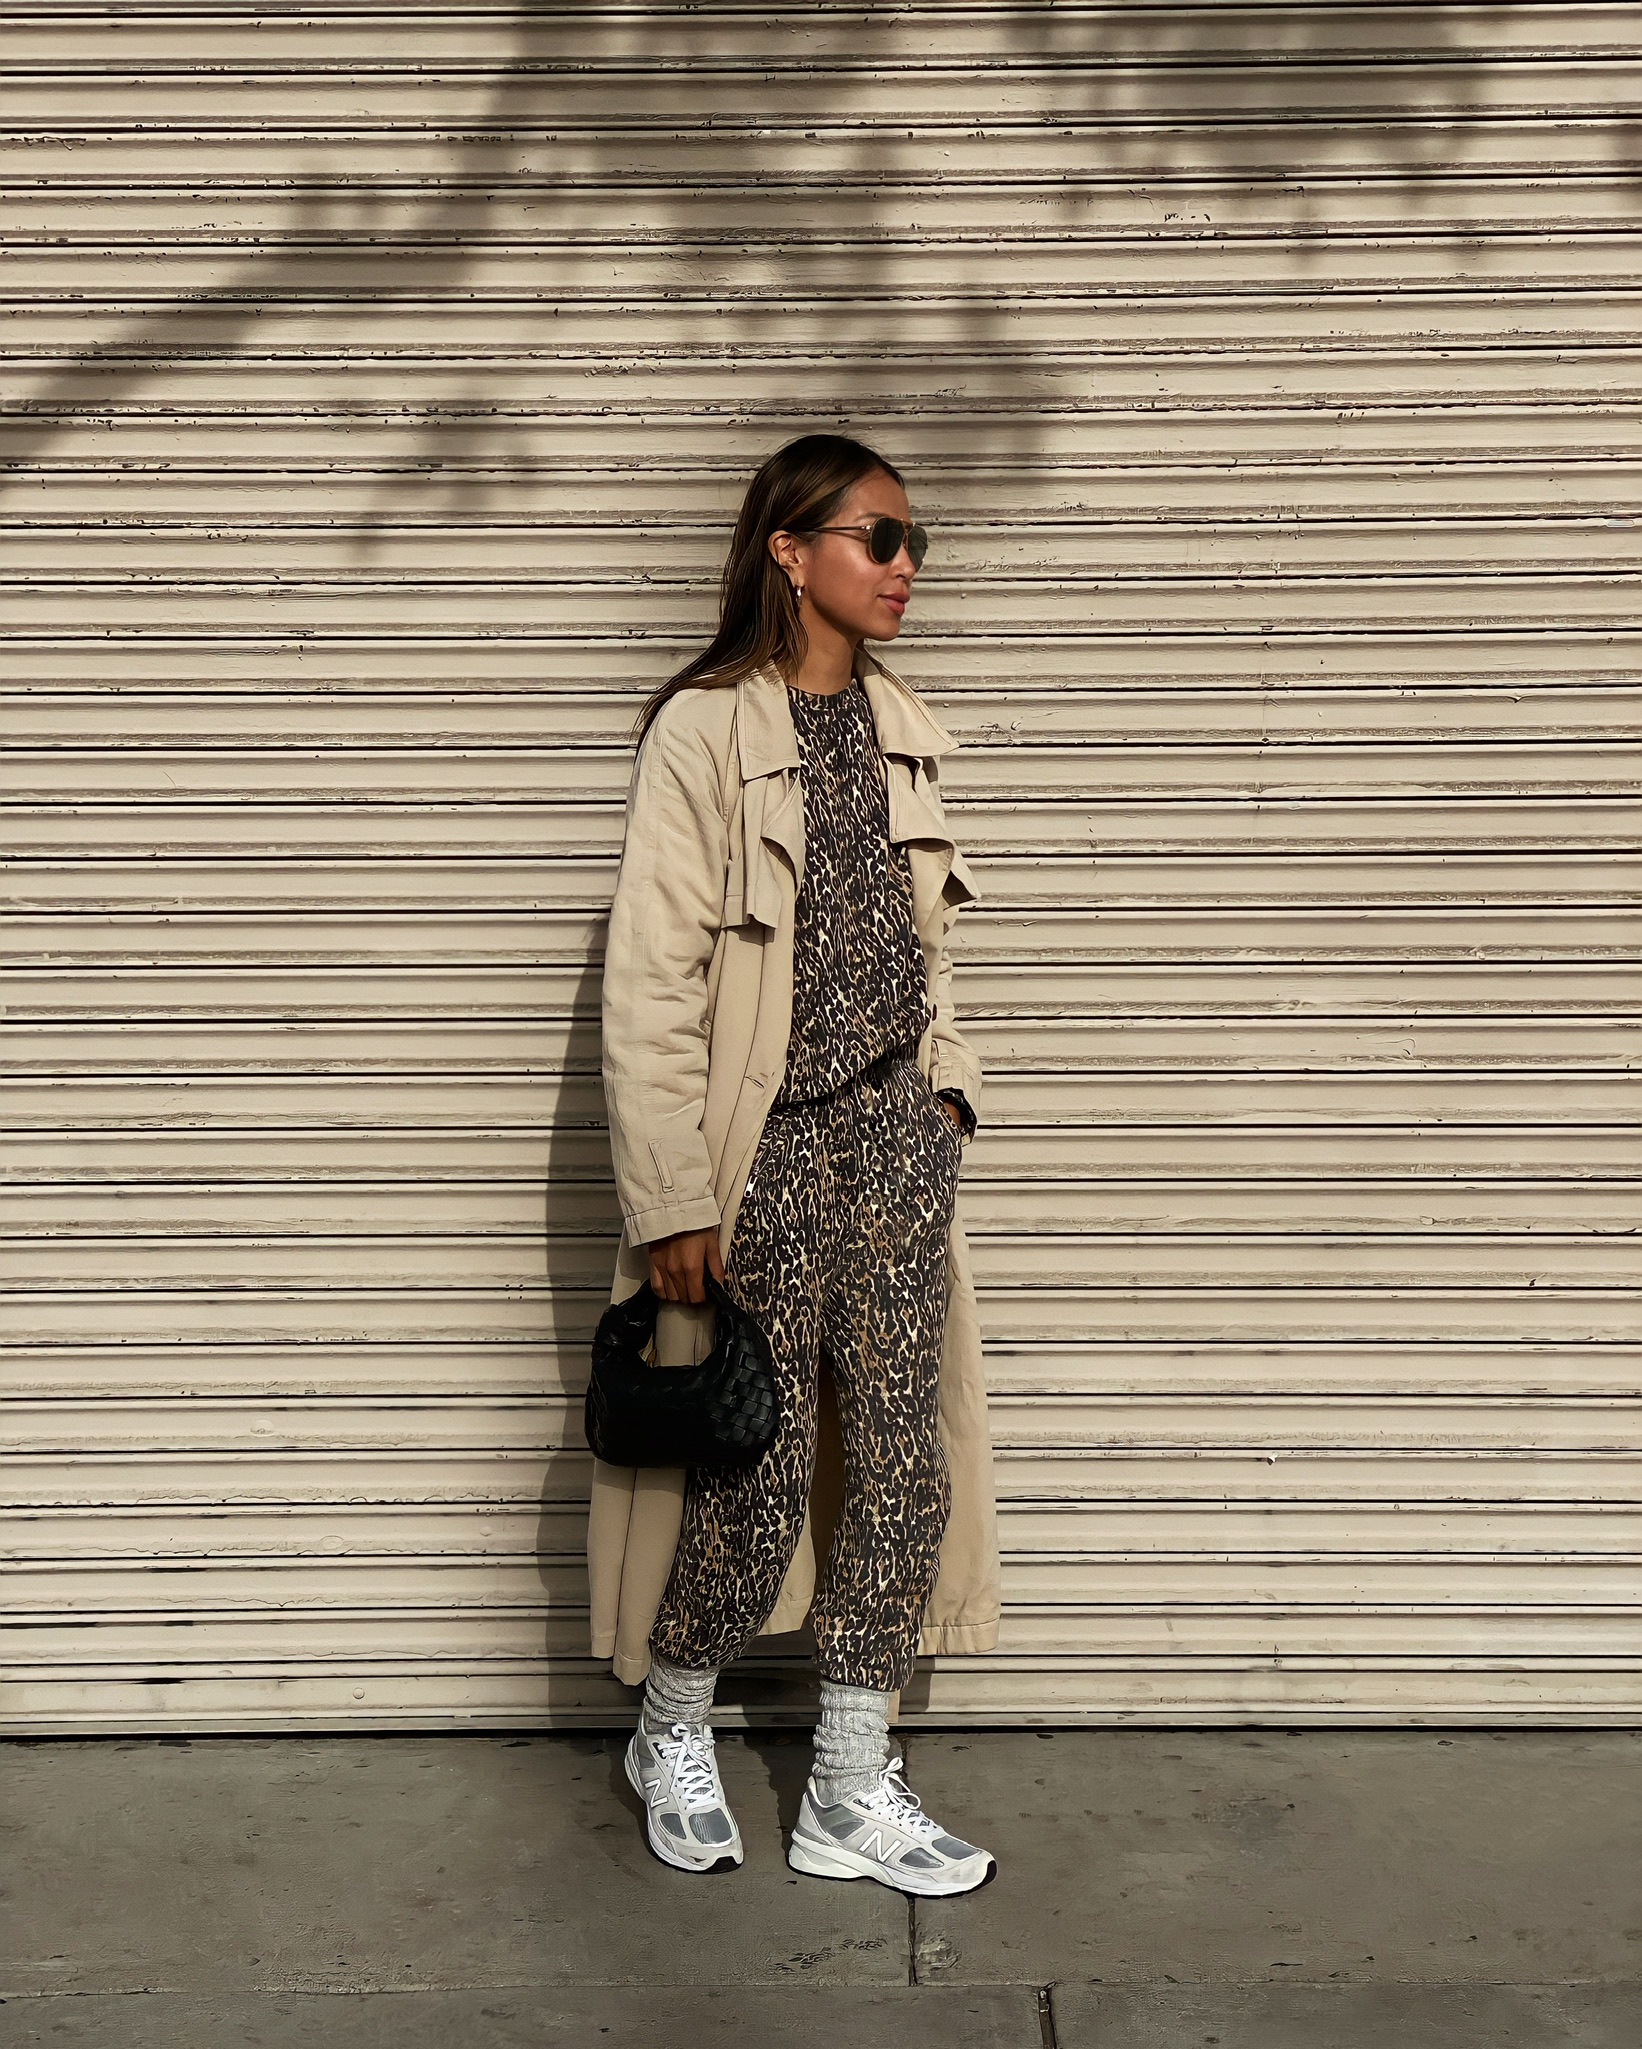 Weekend uniform. #WGACALV @sincerelyjules with our Louis Vuitton